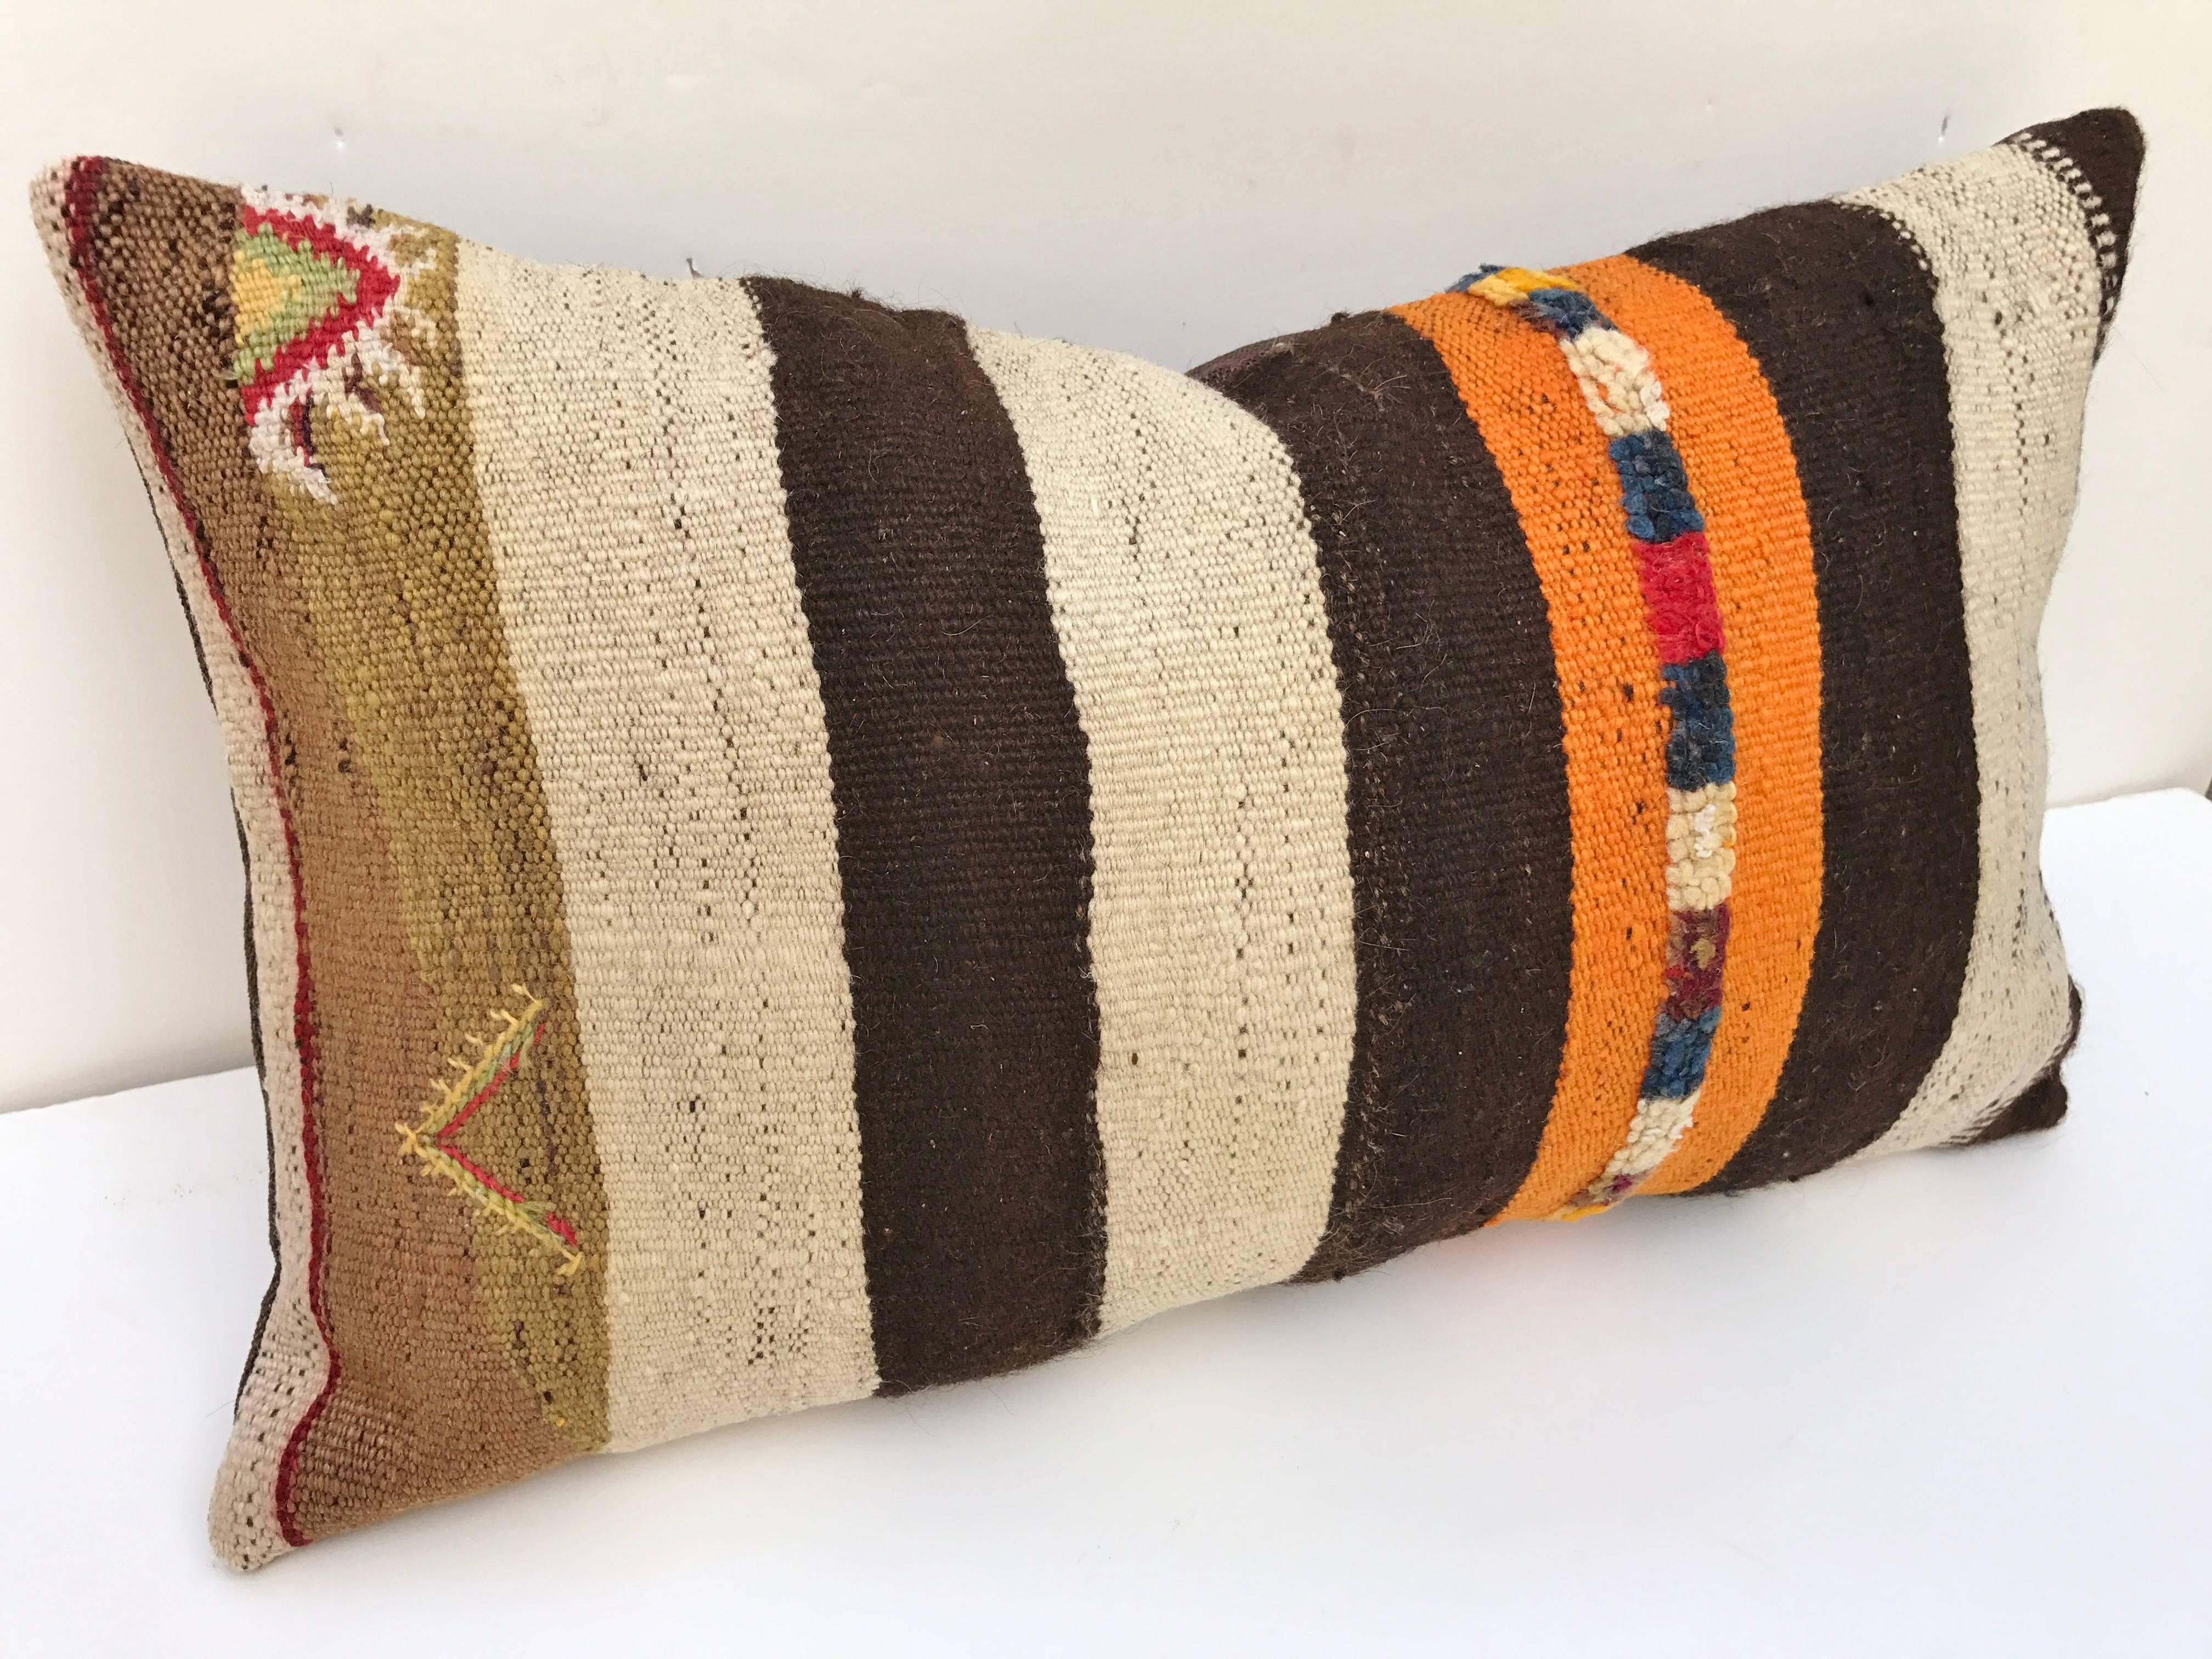 Custom pillow cut from a hnd loomed wool Moroccan Berber rug from the Atlas Mountains. Stripes are embellished with rows of tufted wool. Pillow is backed in a linen blend, filled with an insert of 100% down and hand sewn closed. All custom pillows